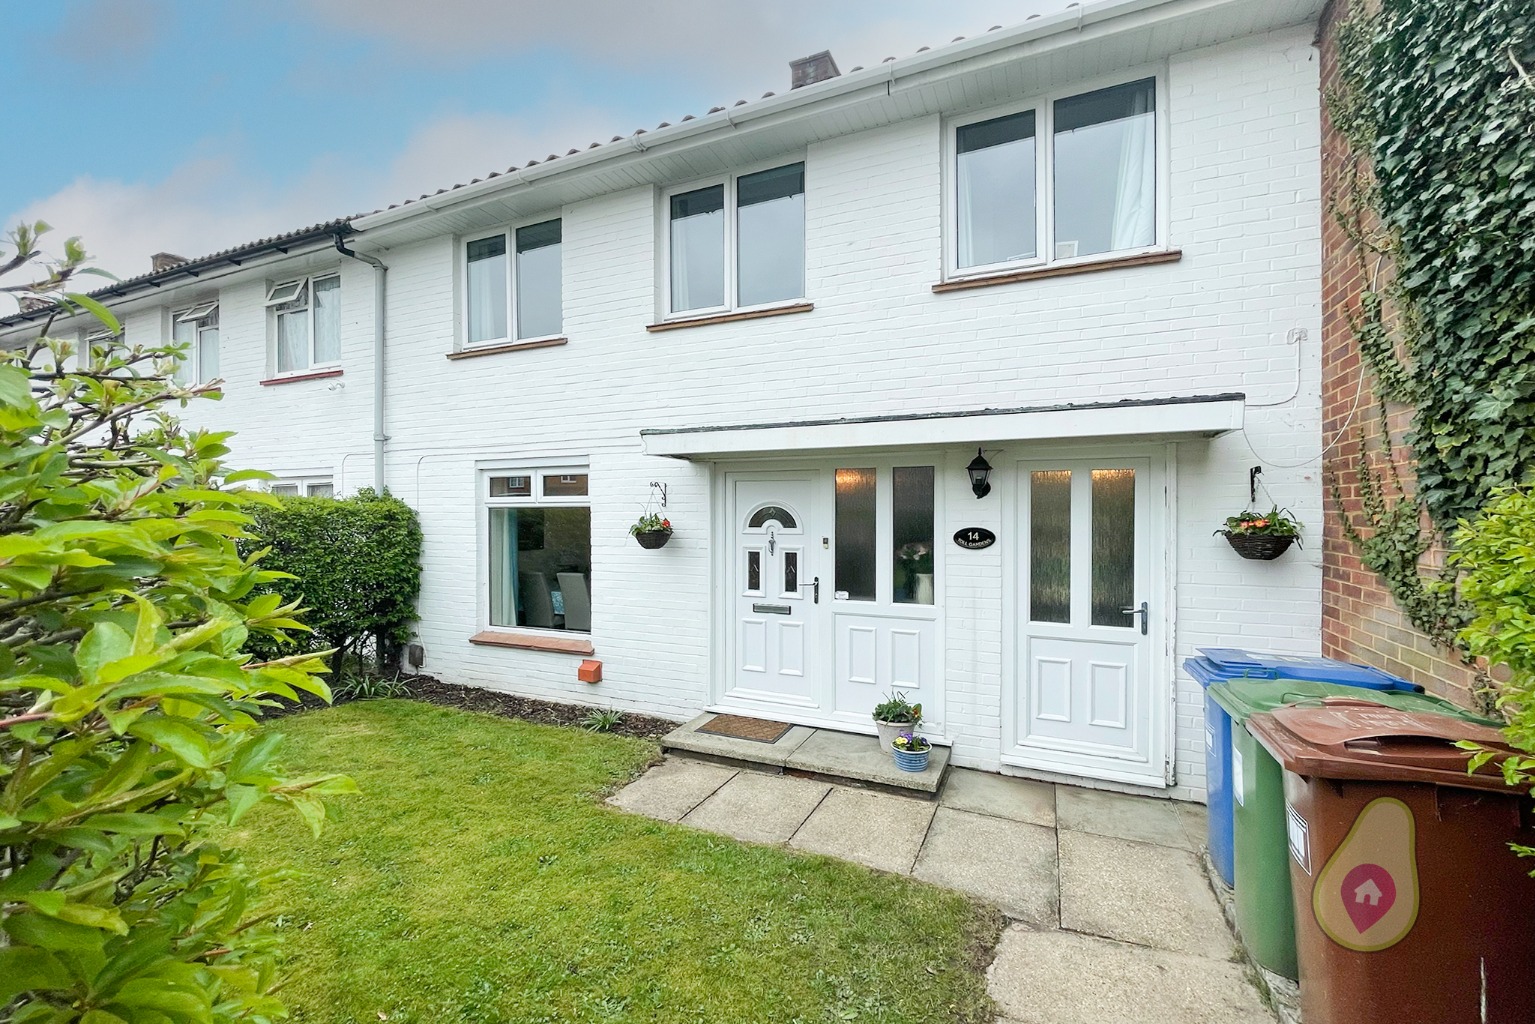 A beautifully presented home, with spacious rooms and a sunny south facing rear garden. Close to local parks and Bracknell town centre as well as being under half a mile to Martins Heron Train Station. Get in touch to arrange your appointment today.